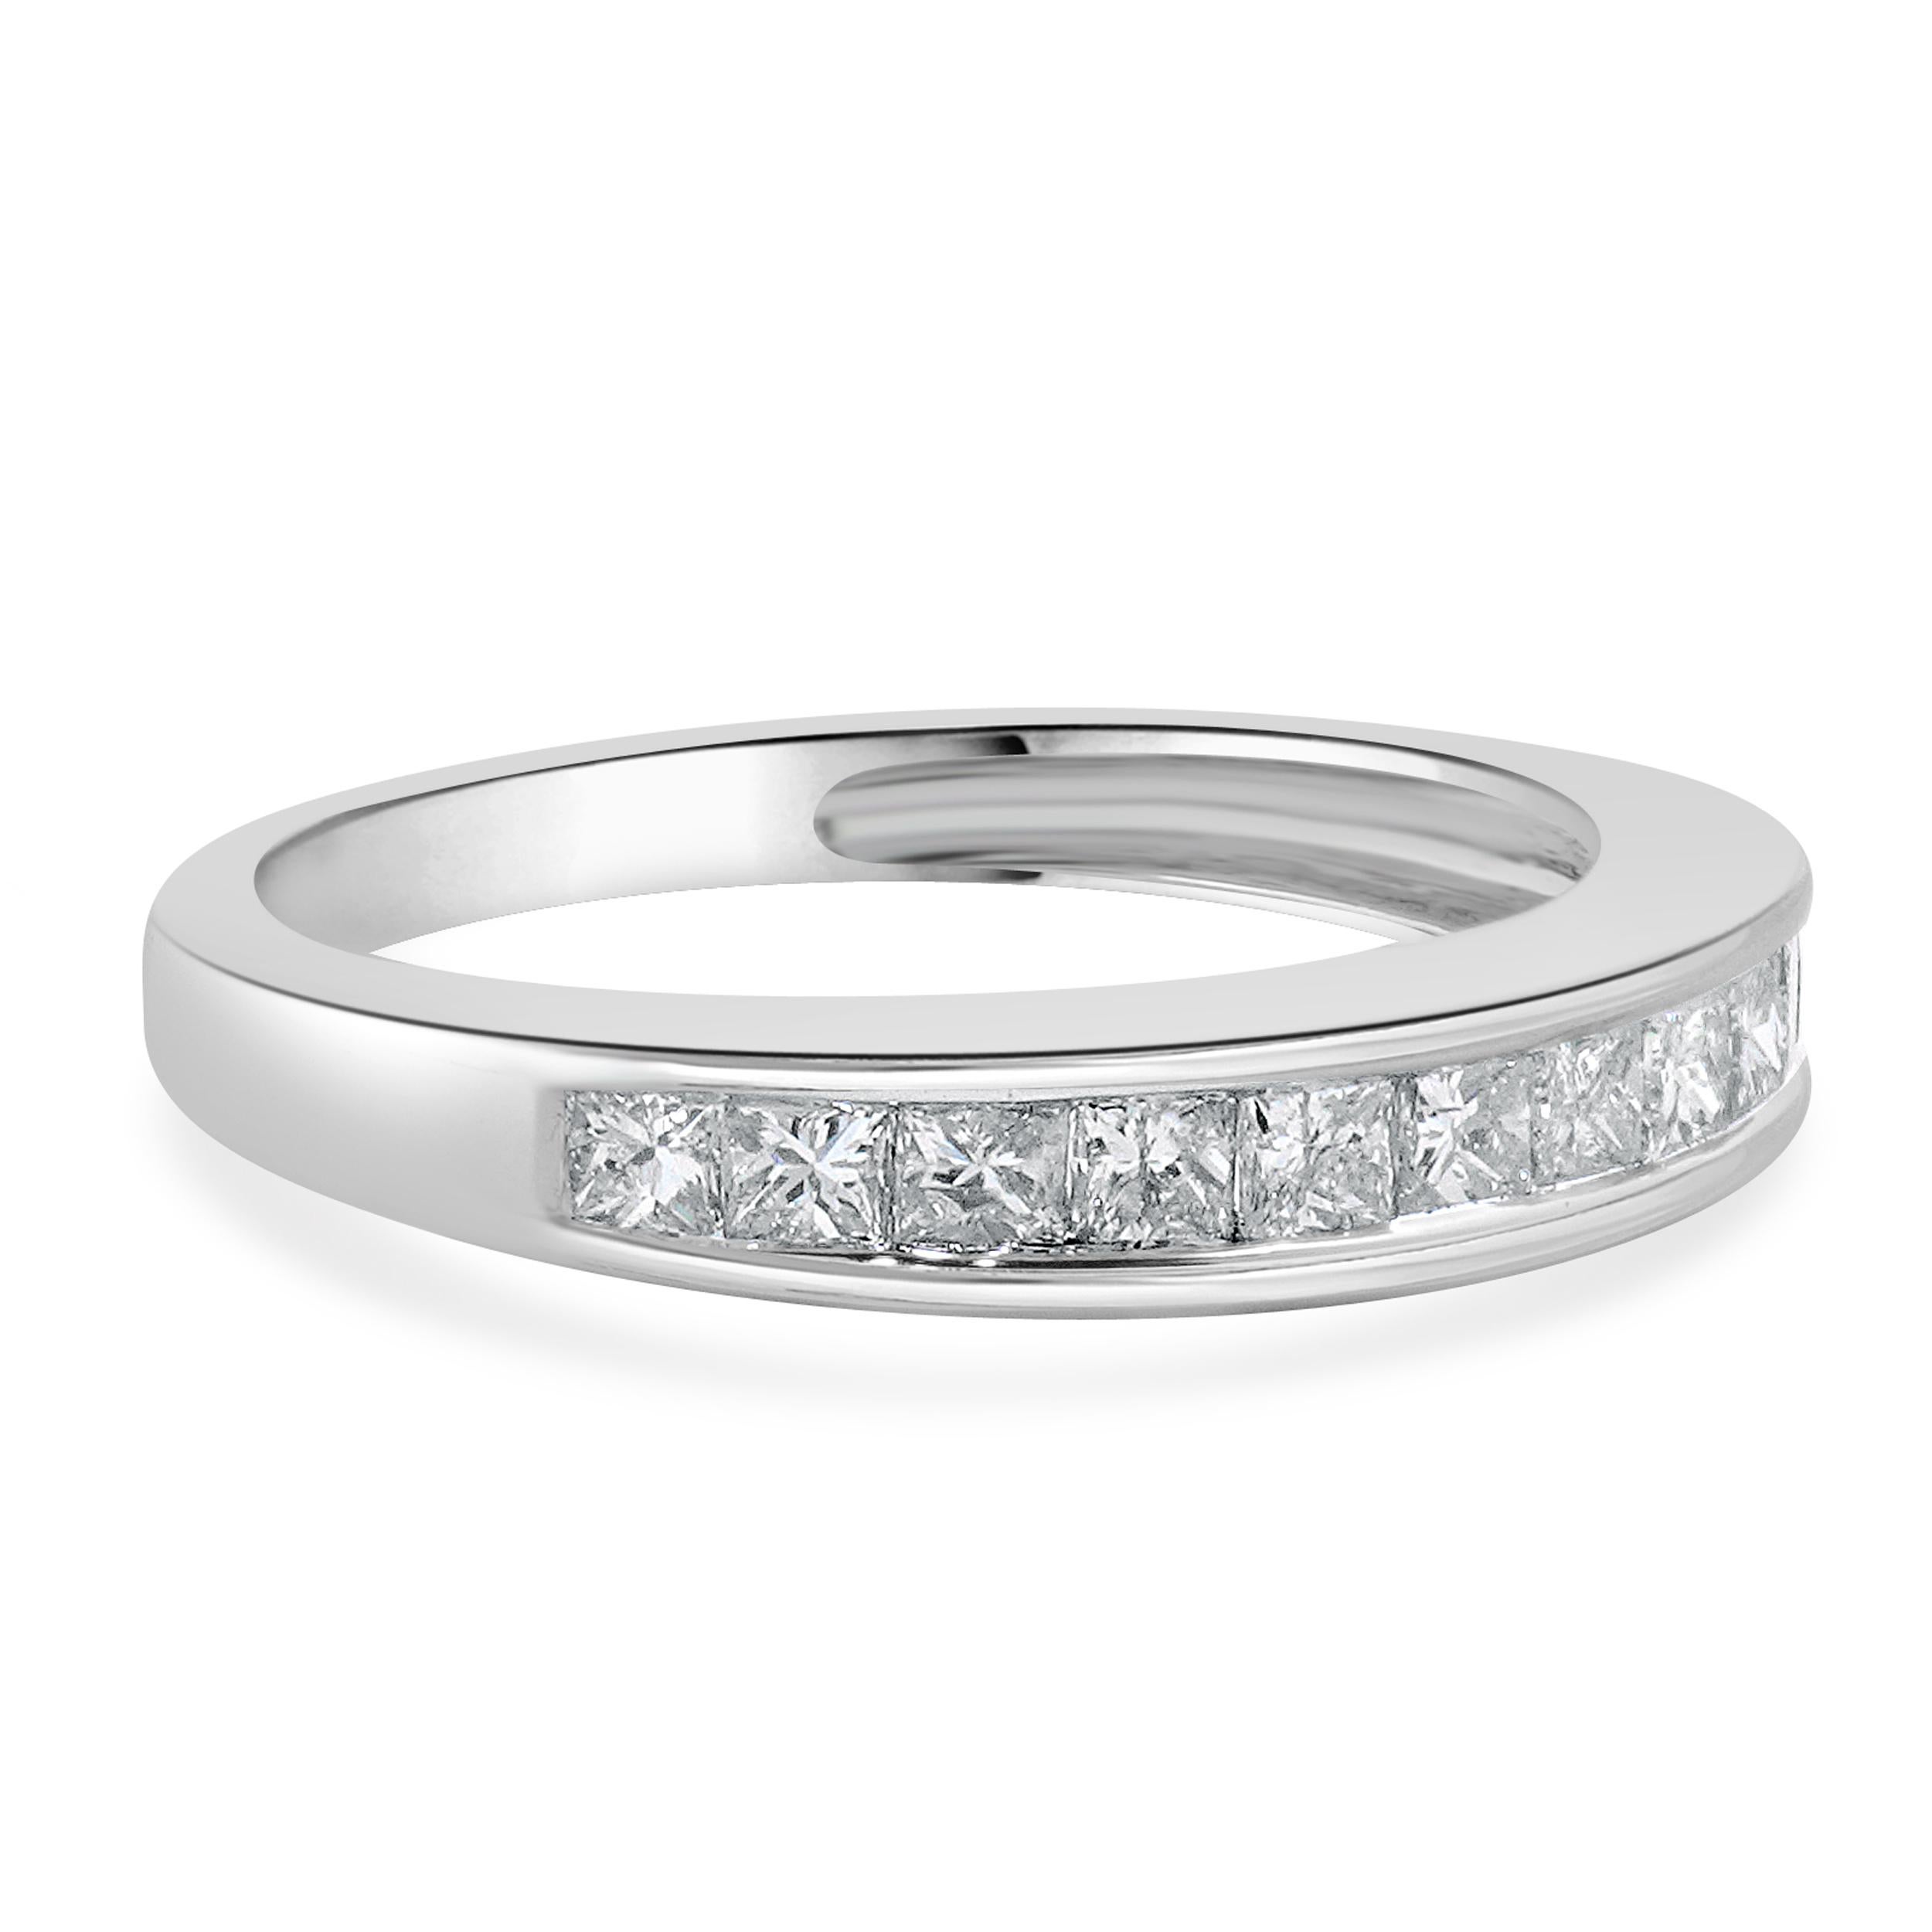 Designer: Custom
Material: 14K white gold
Diamonds: 11 princess cut = 0.88cttw
Color: I
Clarity: I1
Size: 5.5 sizing available 
Dimensions: ring top measures 3.6mm in width
Weight: 2.65 grams
